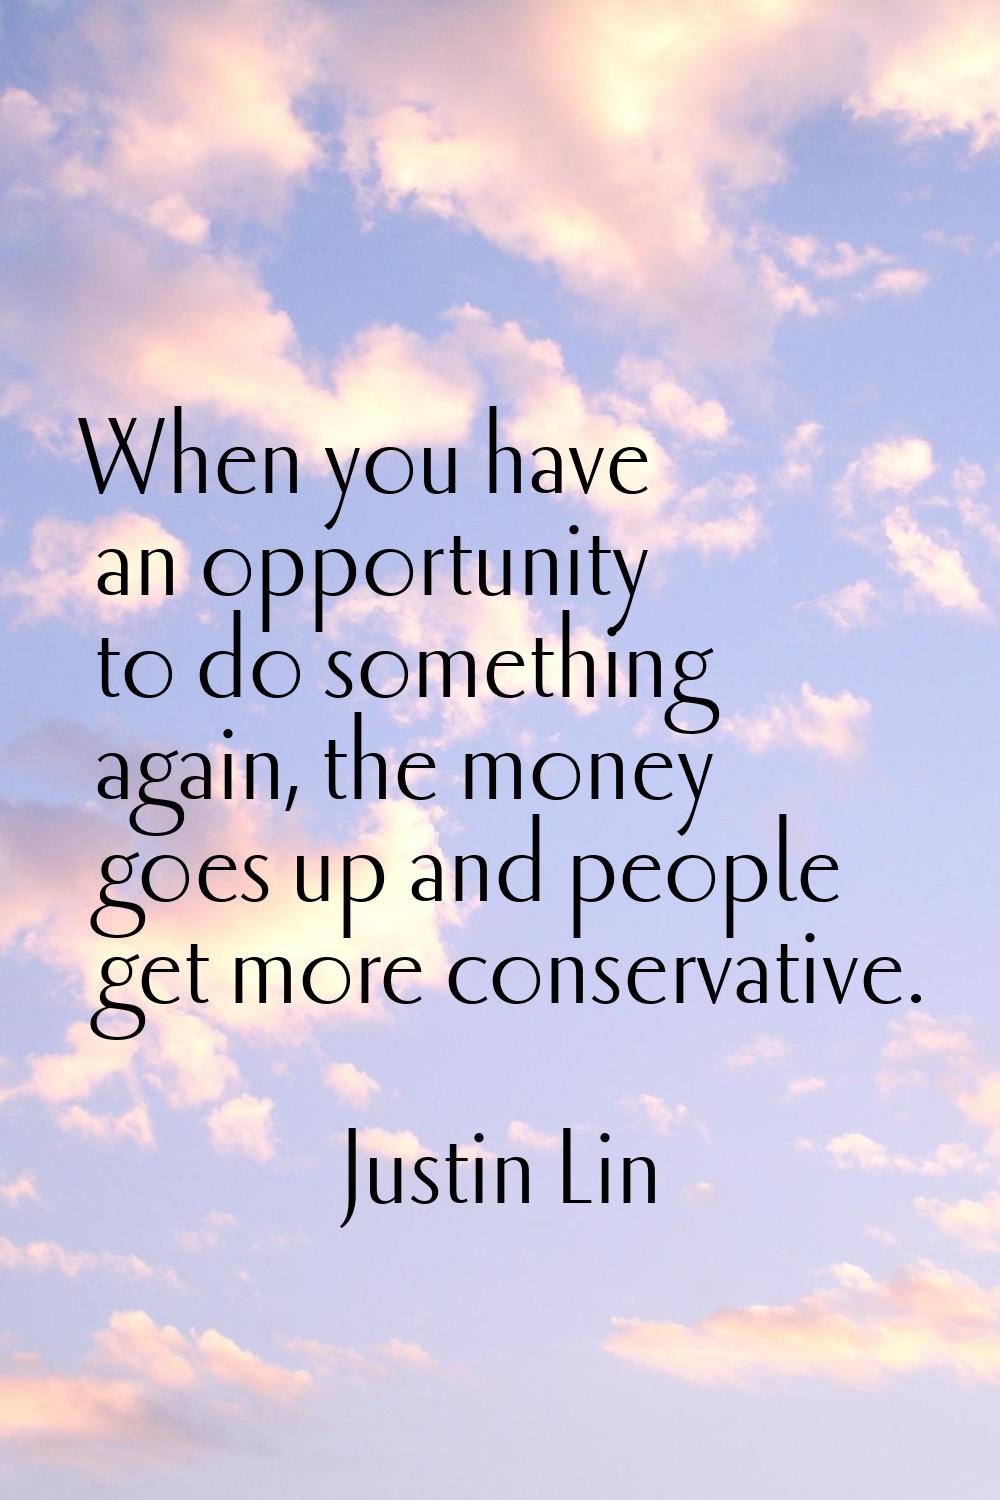 When you have an opportunity to do something again, the money goes up and people get more conservat